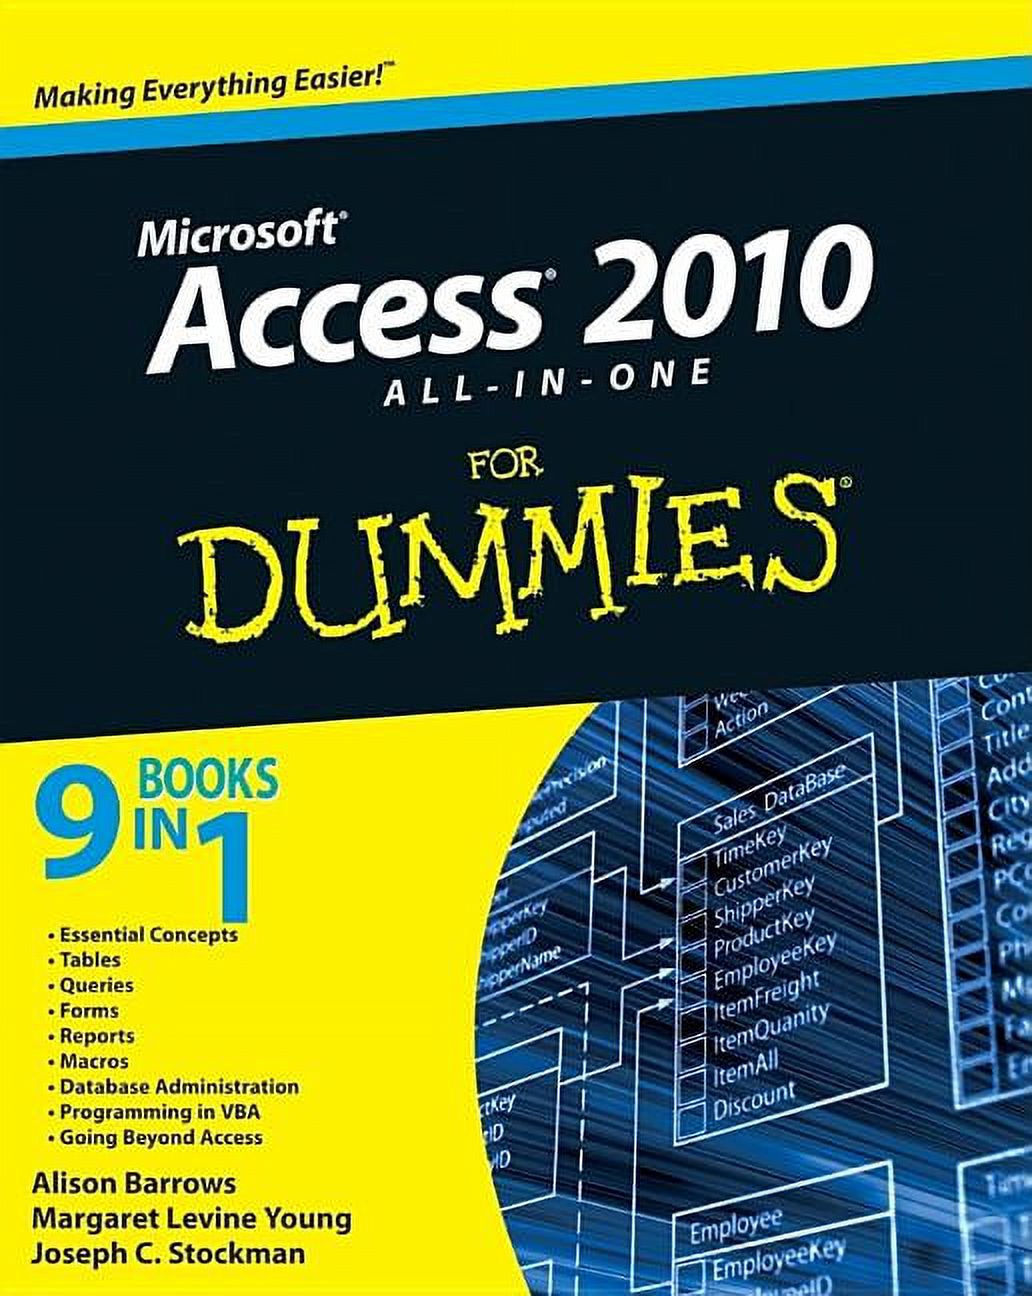 For Dummies: Access 2010 All-In-One for Dummies (Paperback) - image 1 of 1